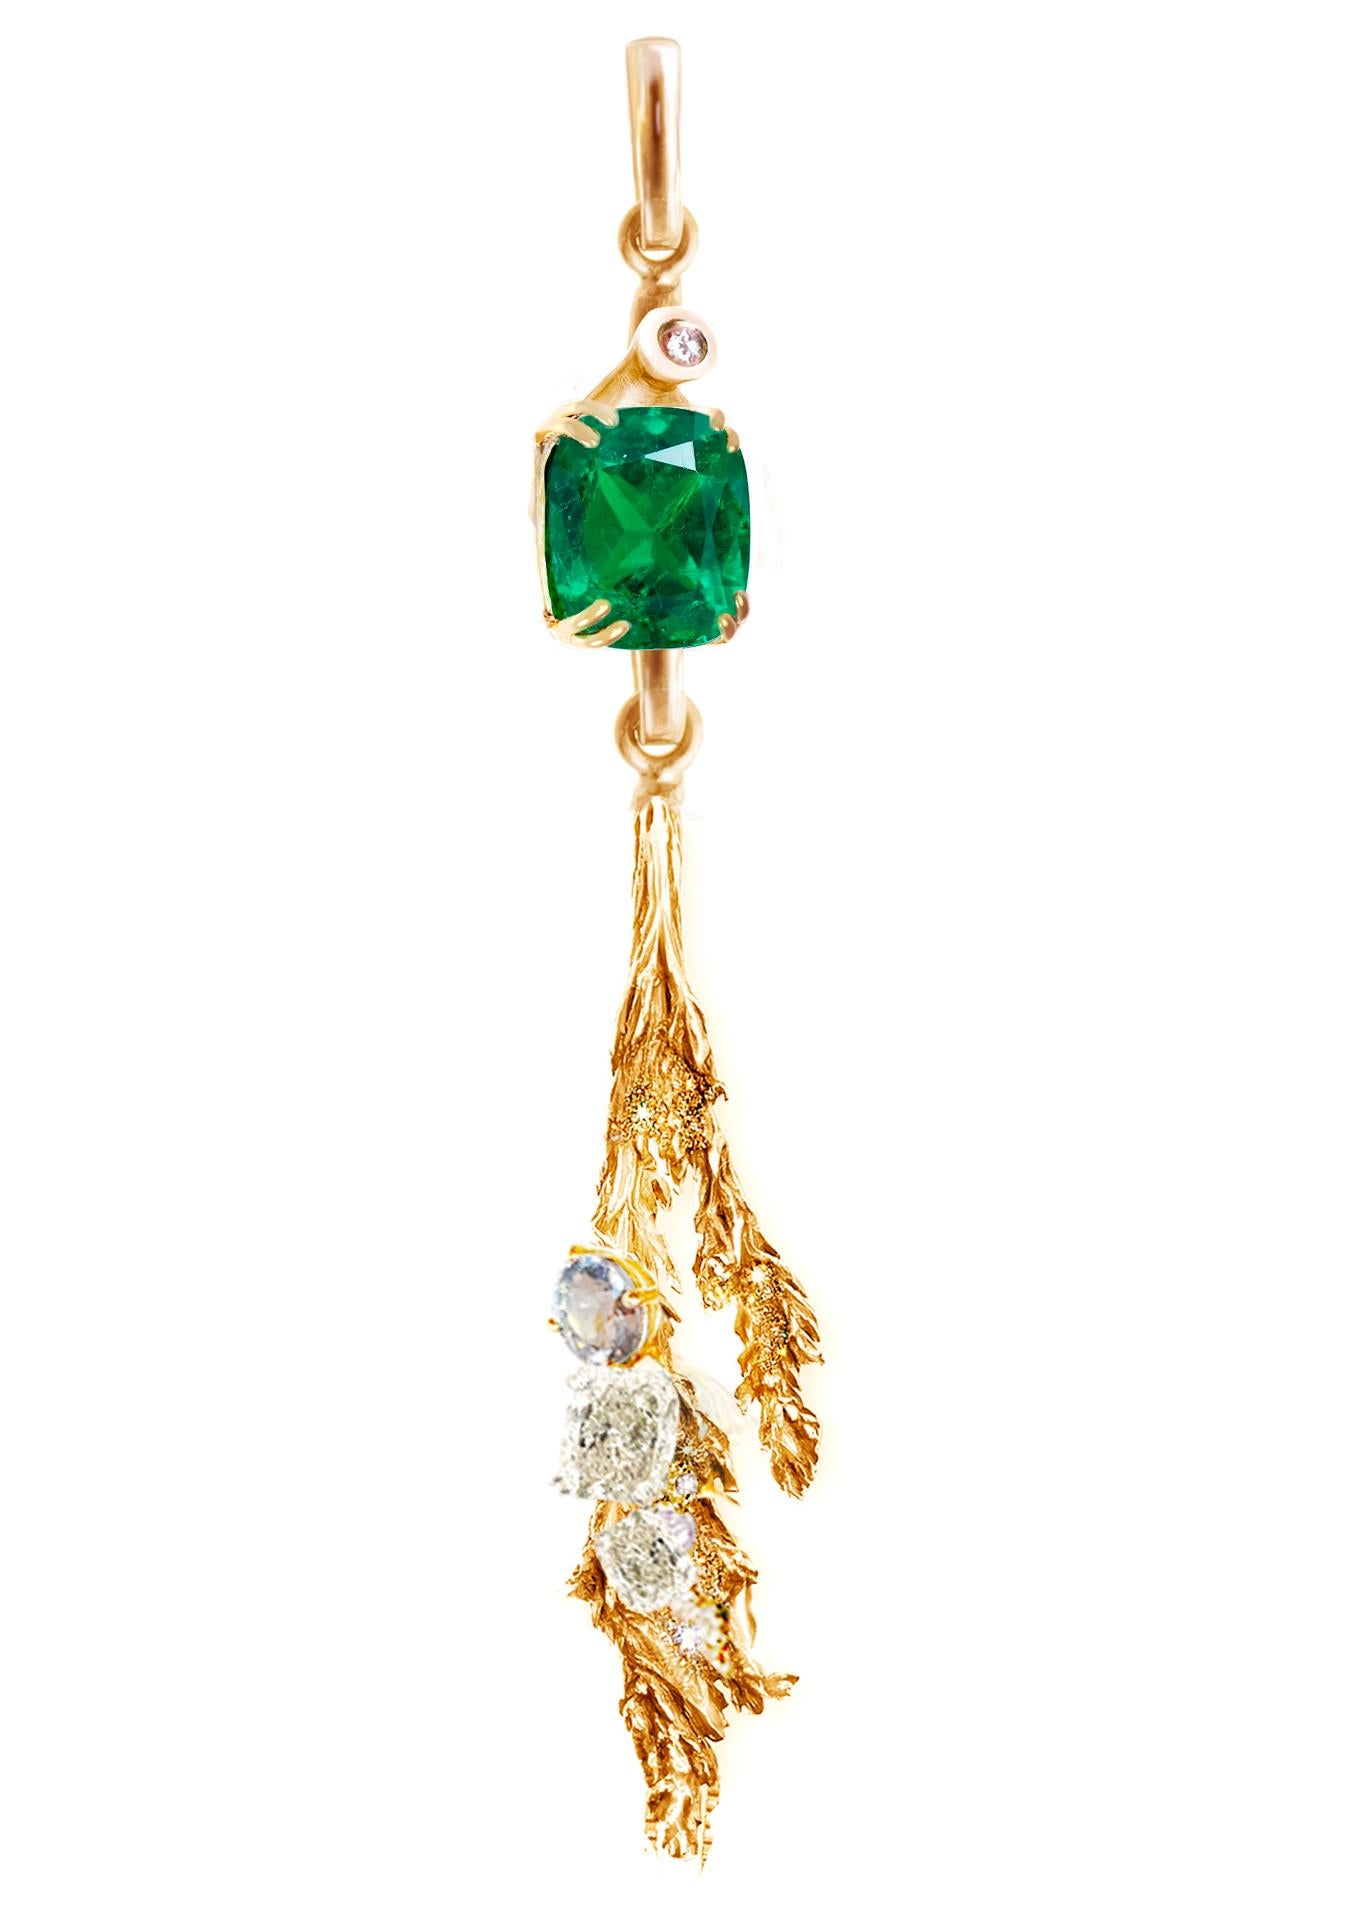 This 18 karat rose gold Juniper pendant necklace is 6 cm long and is encrusted with a cushion-cut 5.45 carat emerald, GIA certified diamonds, and a sapphire. The dimensions of the emerald are 11.2x10 mm, and two of the diamonds are SI, F/H, GIA